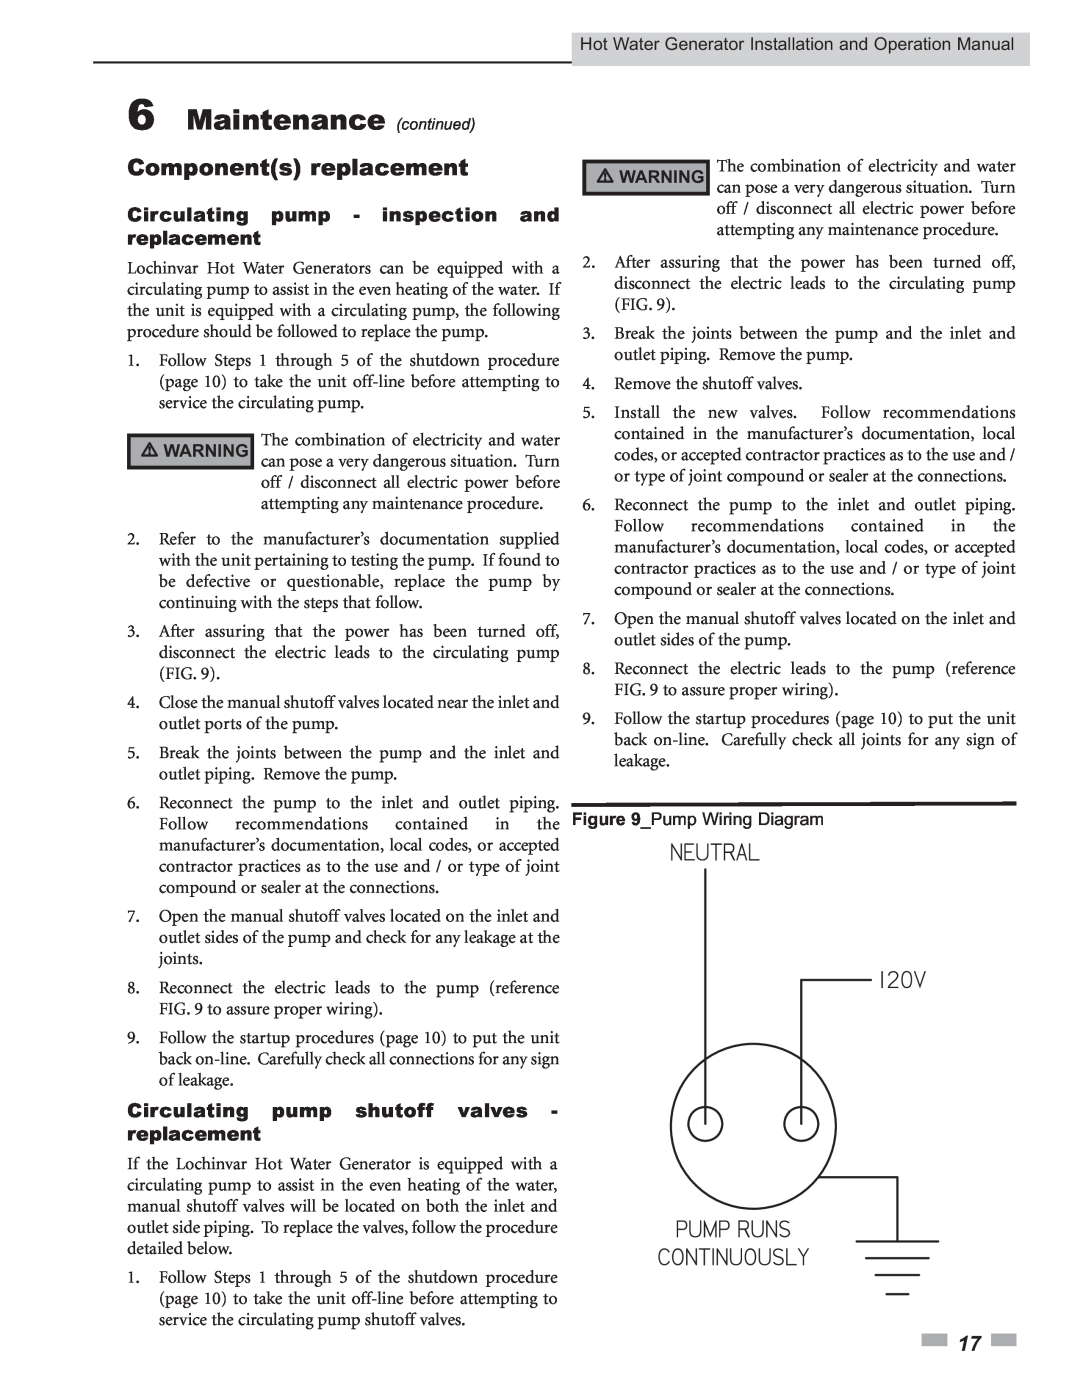 Lochinvar Hot Water Generator operation manual 6Maintenance continued, Components replacement, Pump Wiring Diagram 